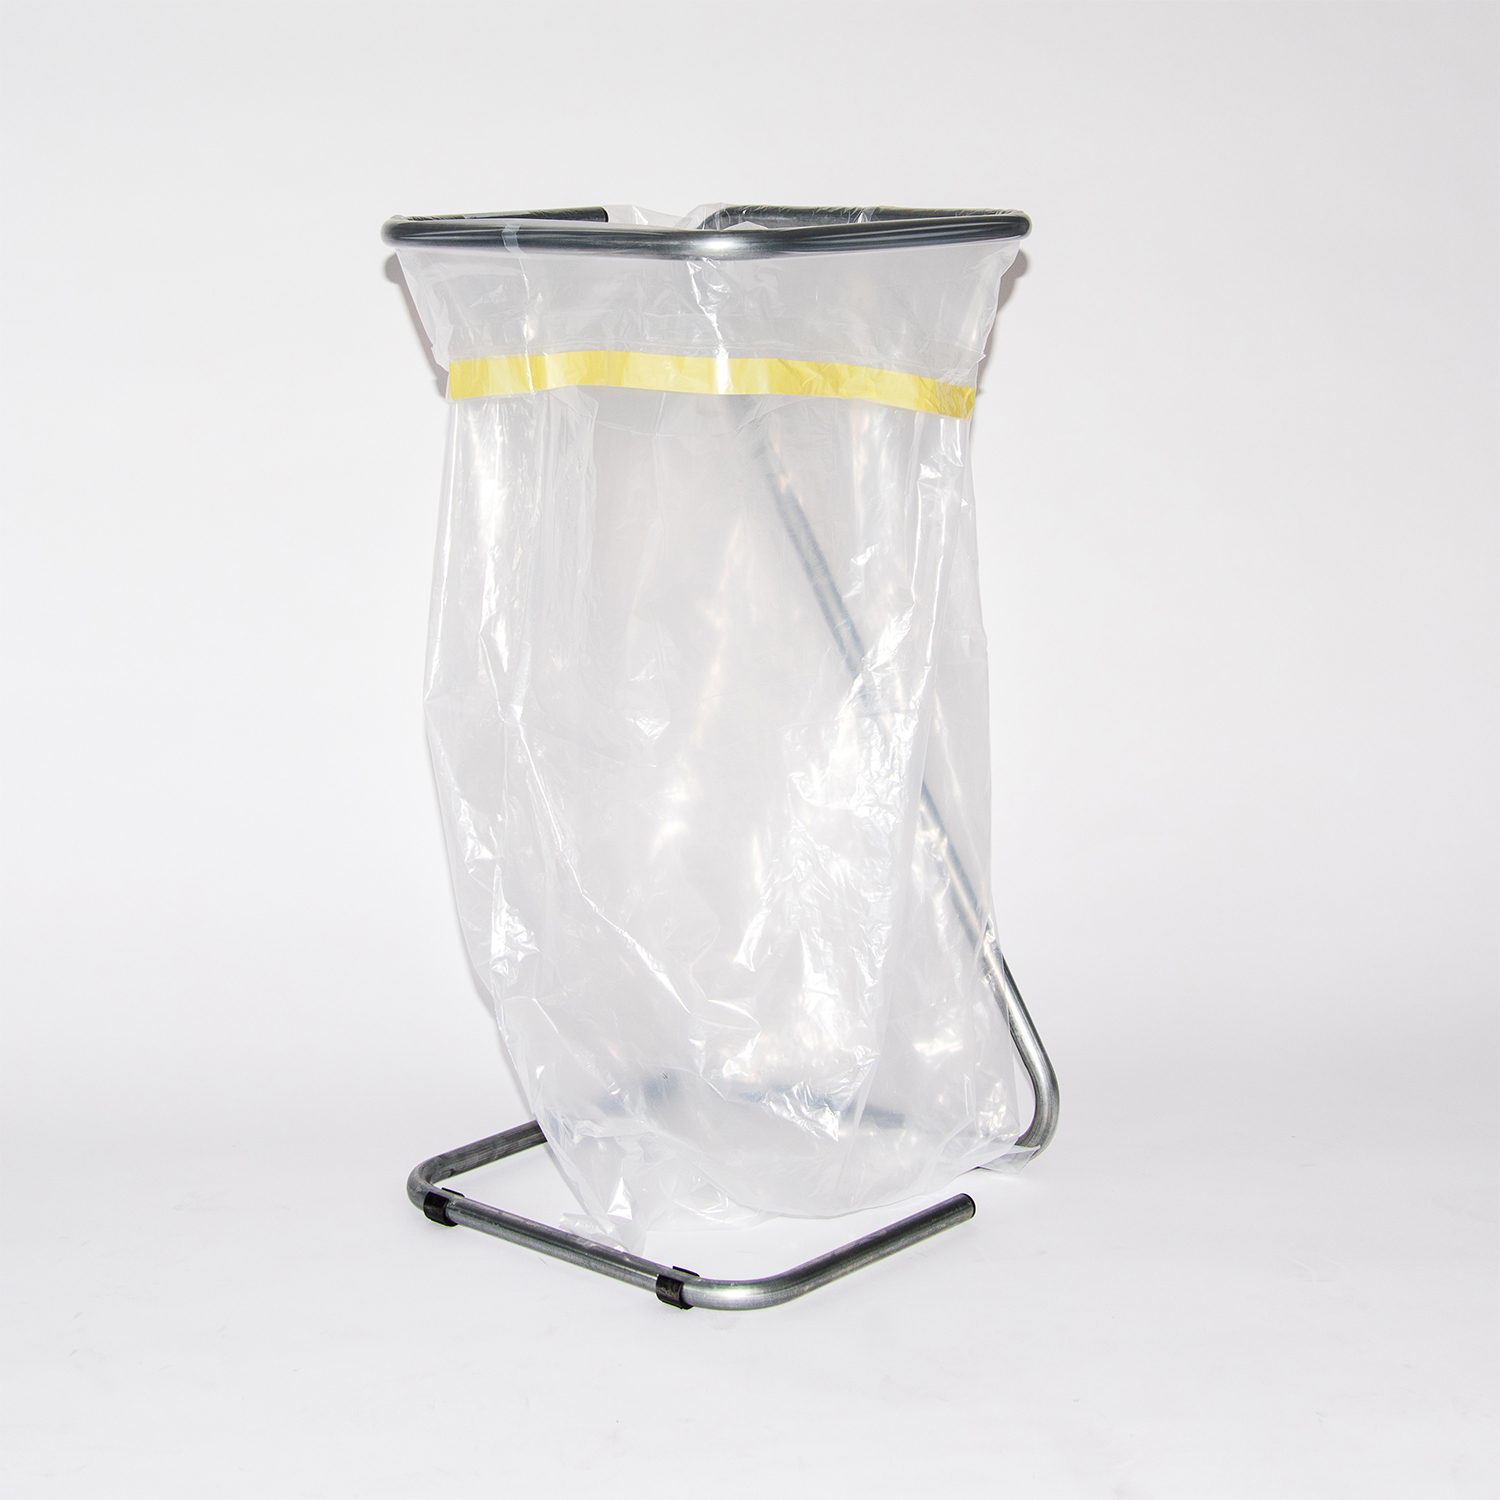 110 liter bags Plastic waste bags 110 l. Do you want to collect plastic or PMD waste at home or in the office? Then the Knapsack 110 litre is the right one for you! Combined with the holder, it takes up very little space. The transparent rubbish bag is specially made for plastic waste collection and is easy to use thanks to its tie-tapes. Still looking for another size of plastic waste bags or PMD waste bags? View our complete range of Knapsacks (up to 2500 litres) here. We can personalise unprinted bags with your own imprint for an additional charge.

Take a look at the 110 litre rubbish bag below. If you would like personalised advice, please contact us.